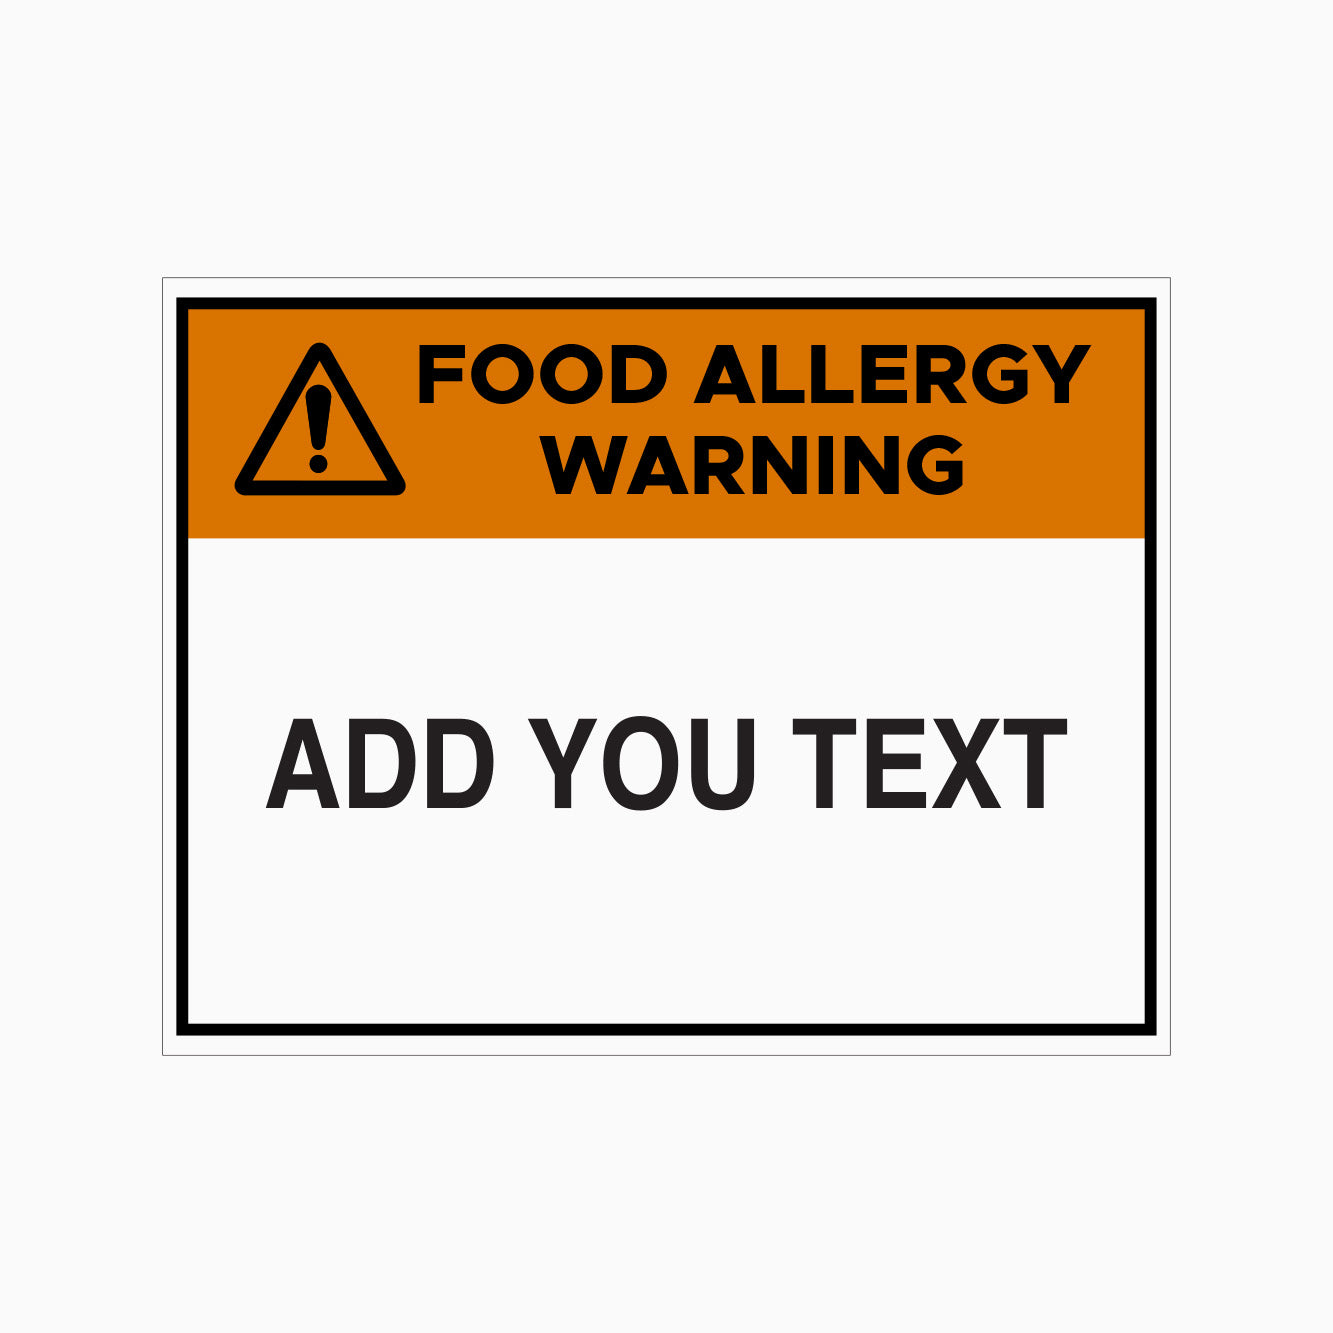 FOOD ALLERGY WARNING SIGN - CUSTOM TEXT SIGN